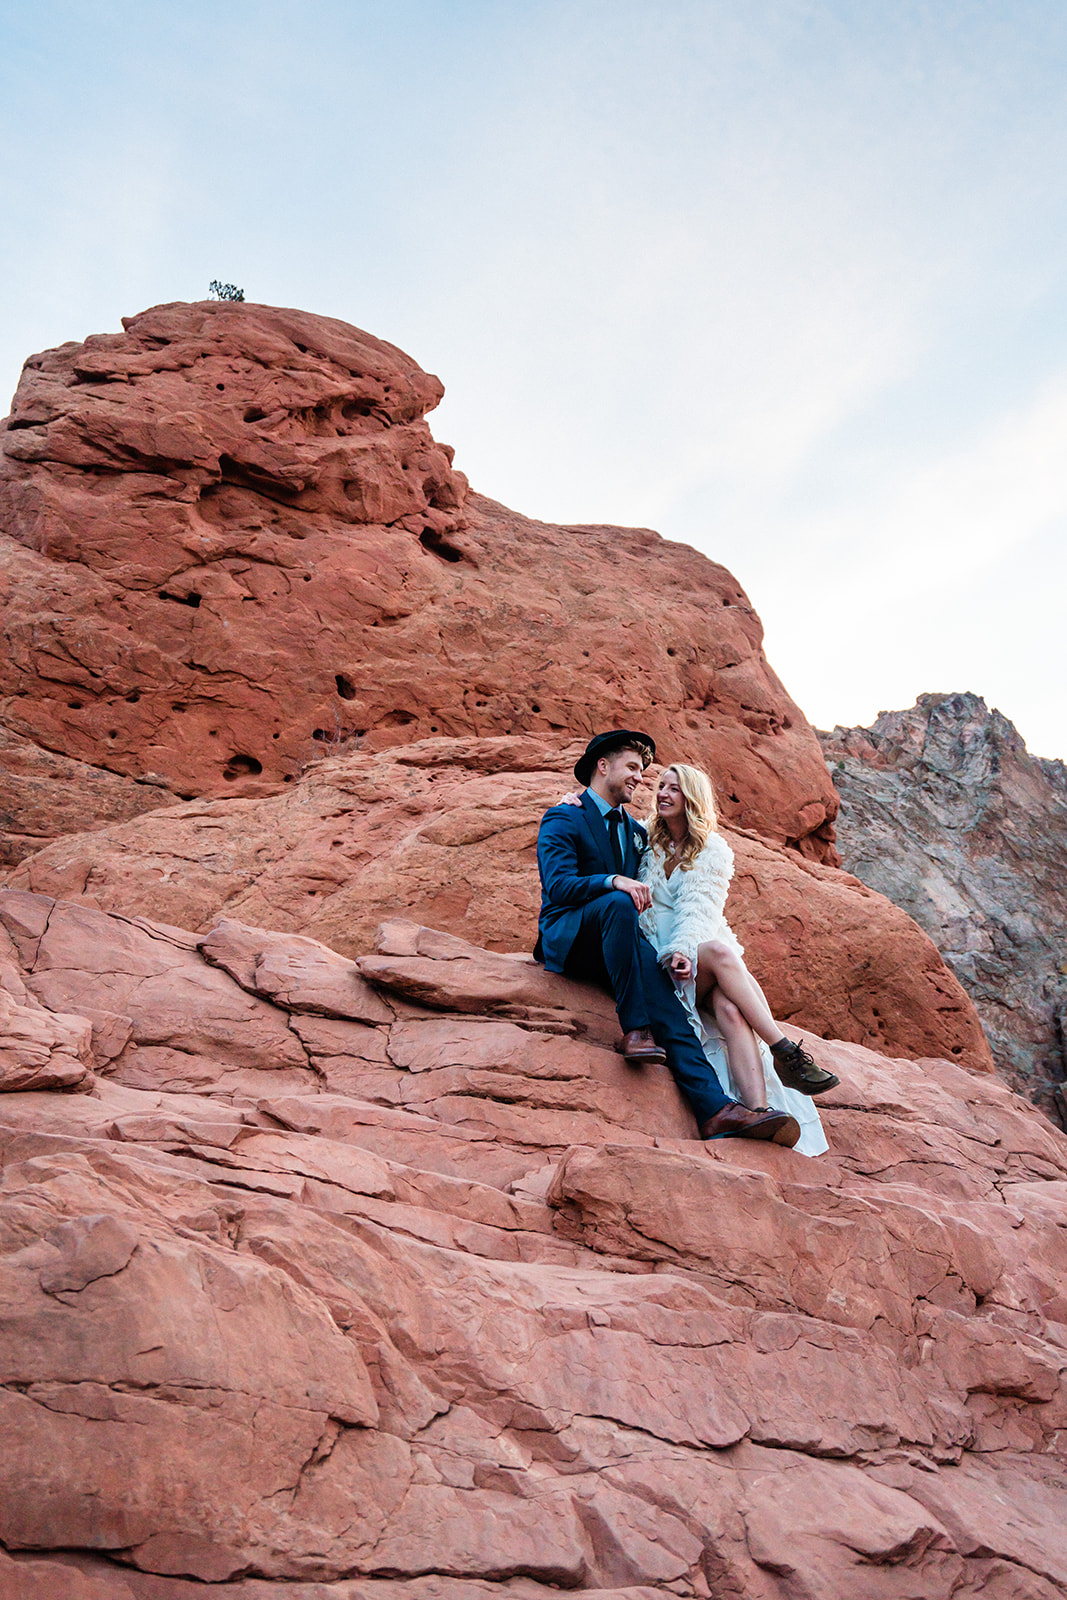 Stunning Adventure Filled Couples Photos at the Garden of the Gods in CO